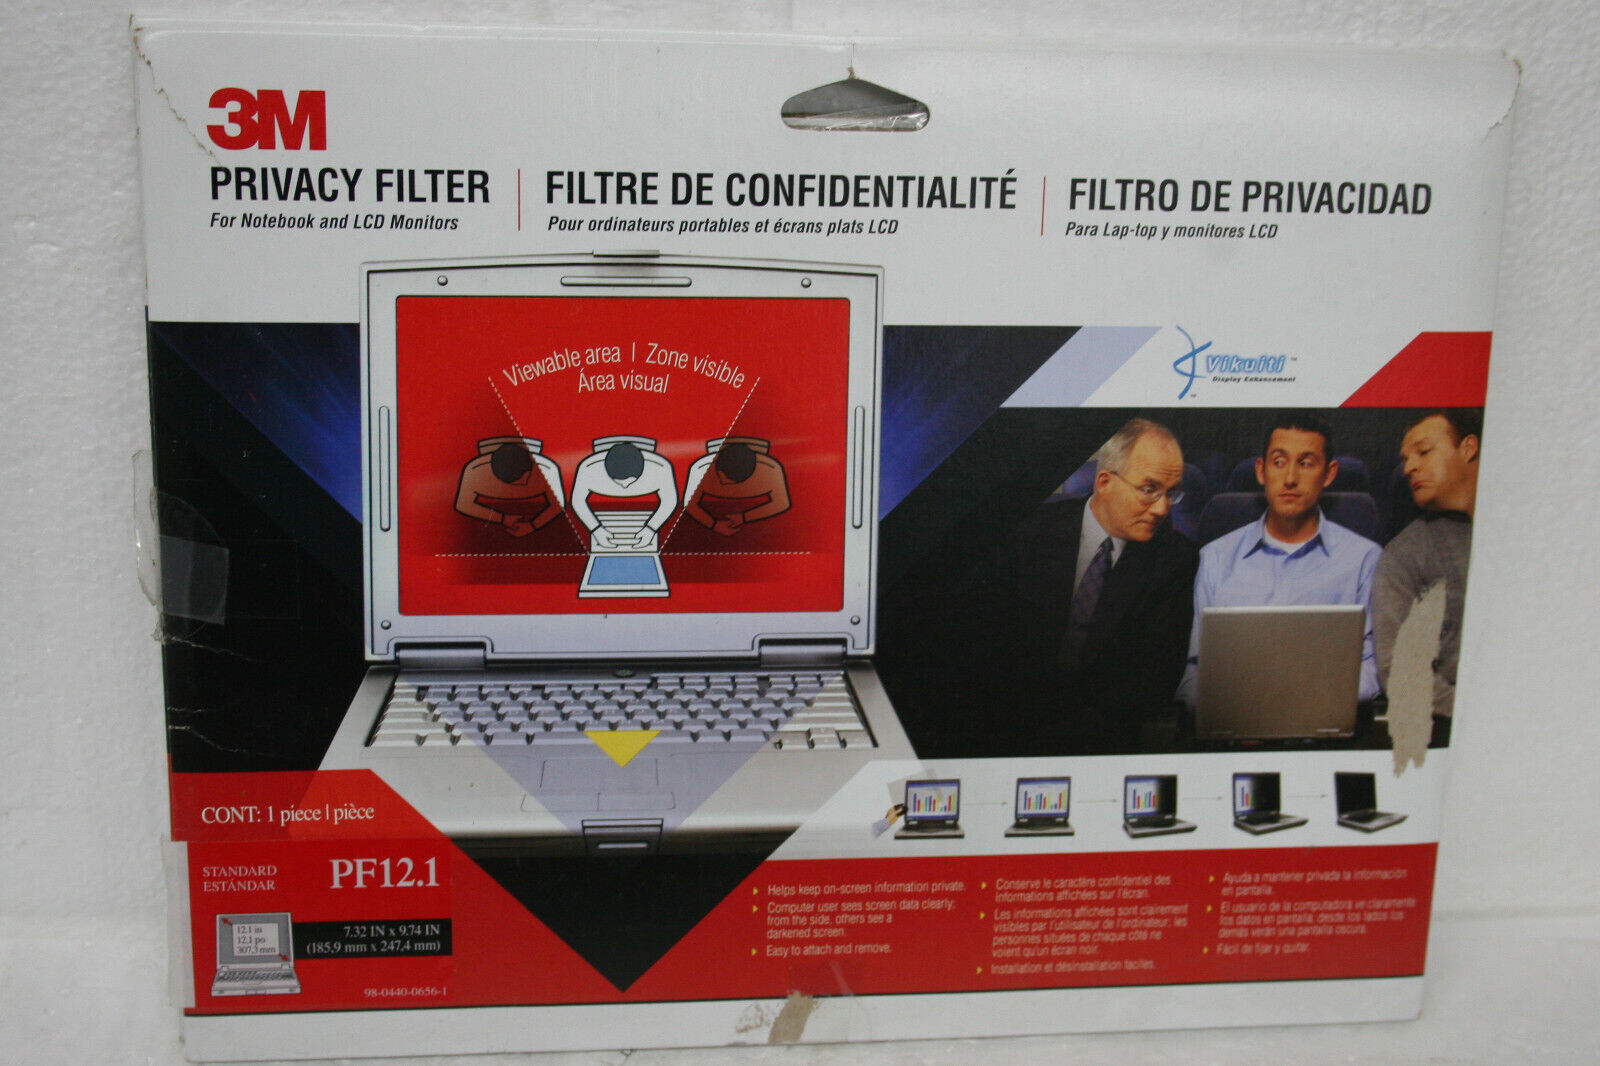 3M PF12.1 Notebook Privacy Filter 